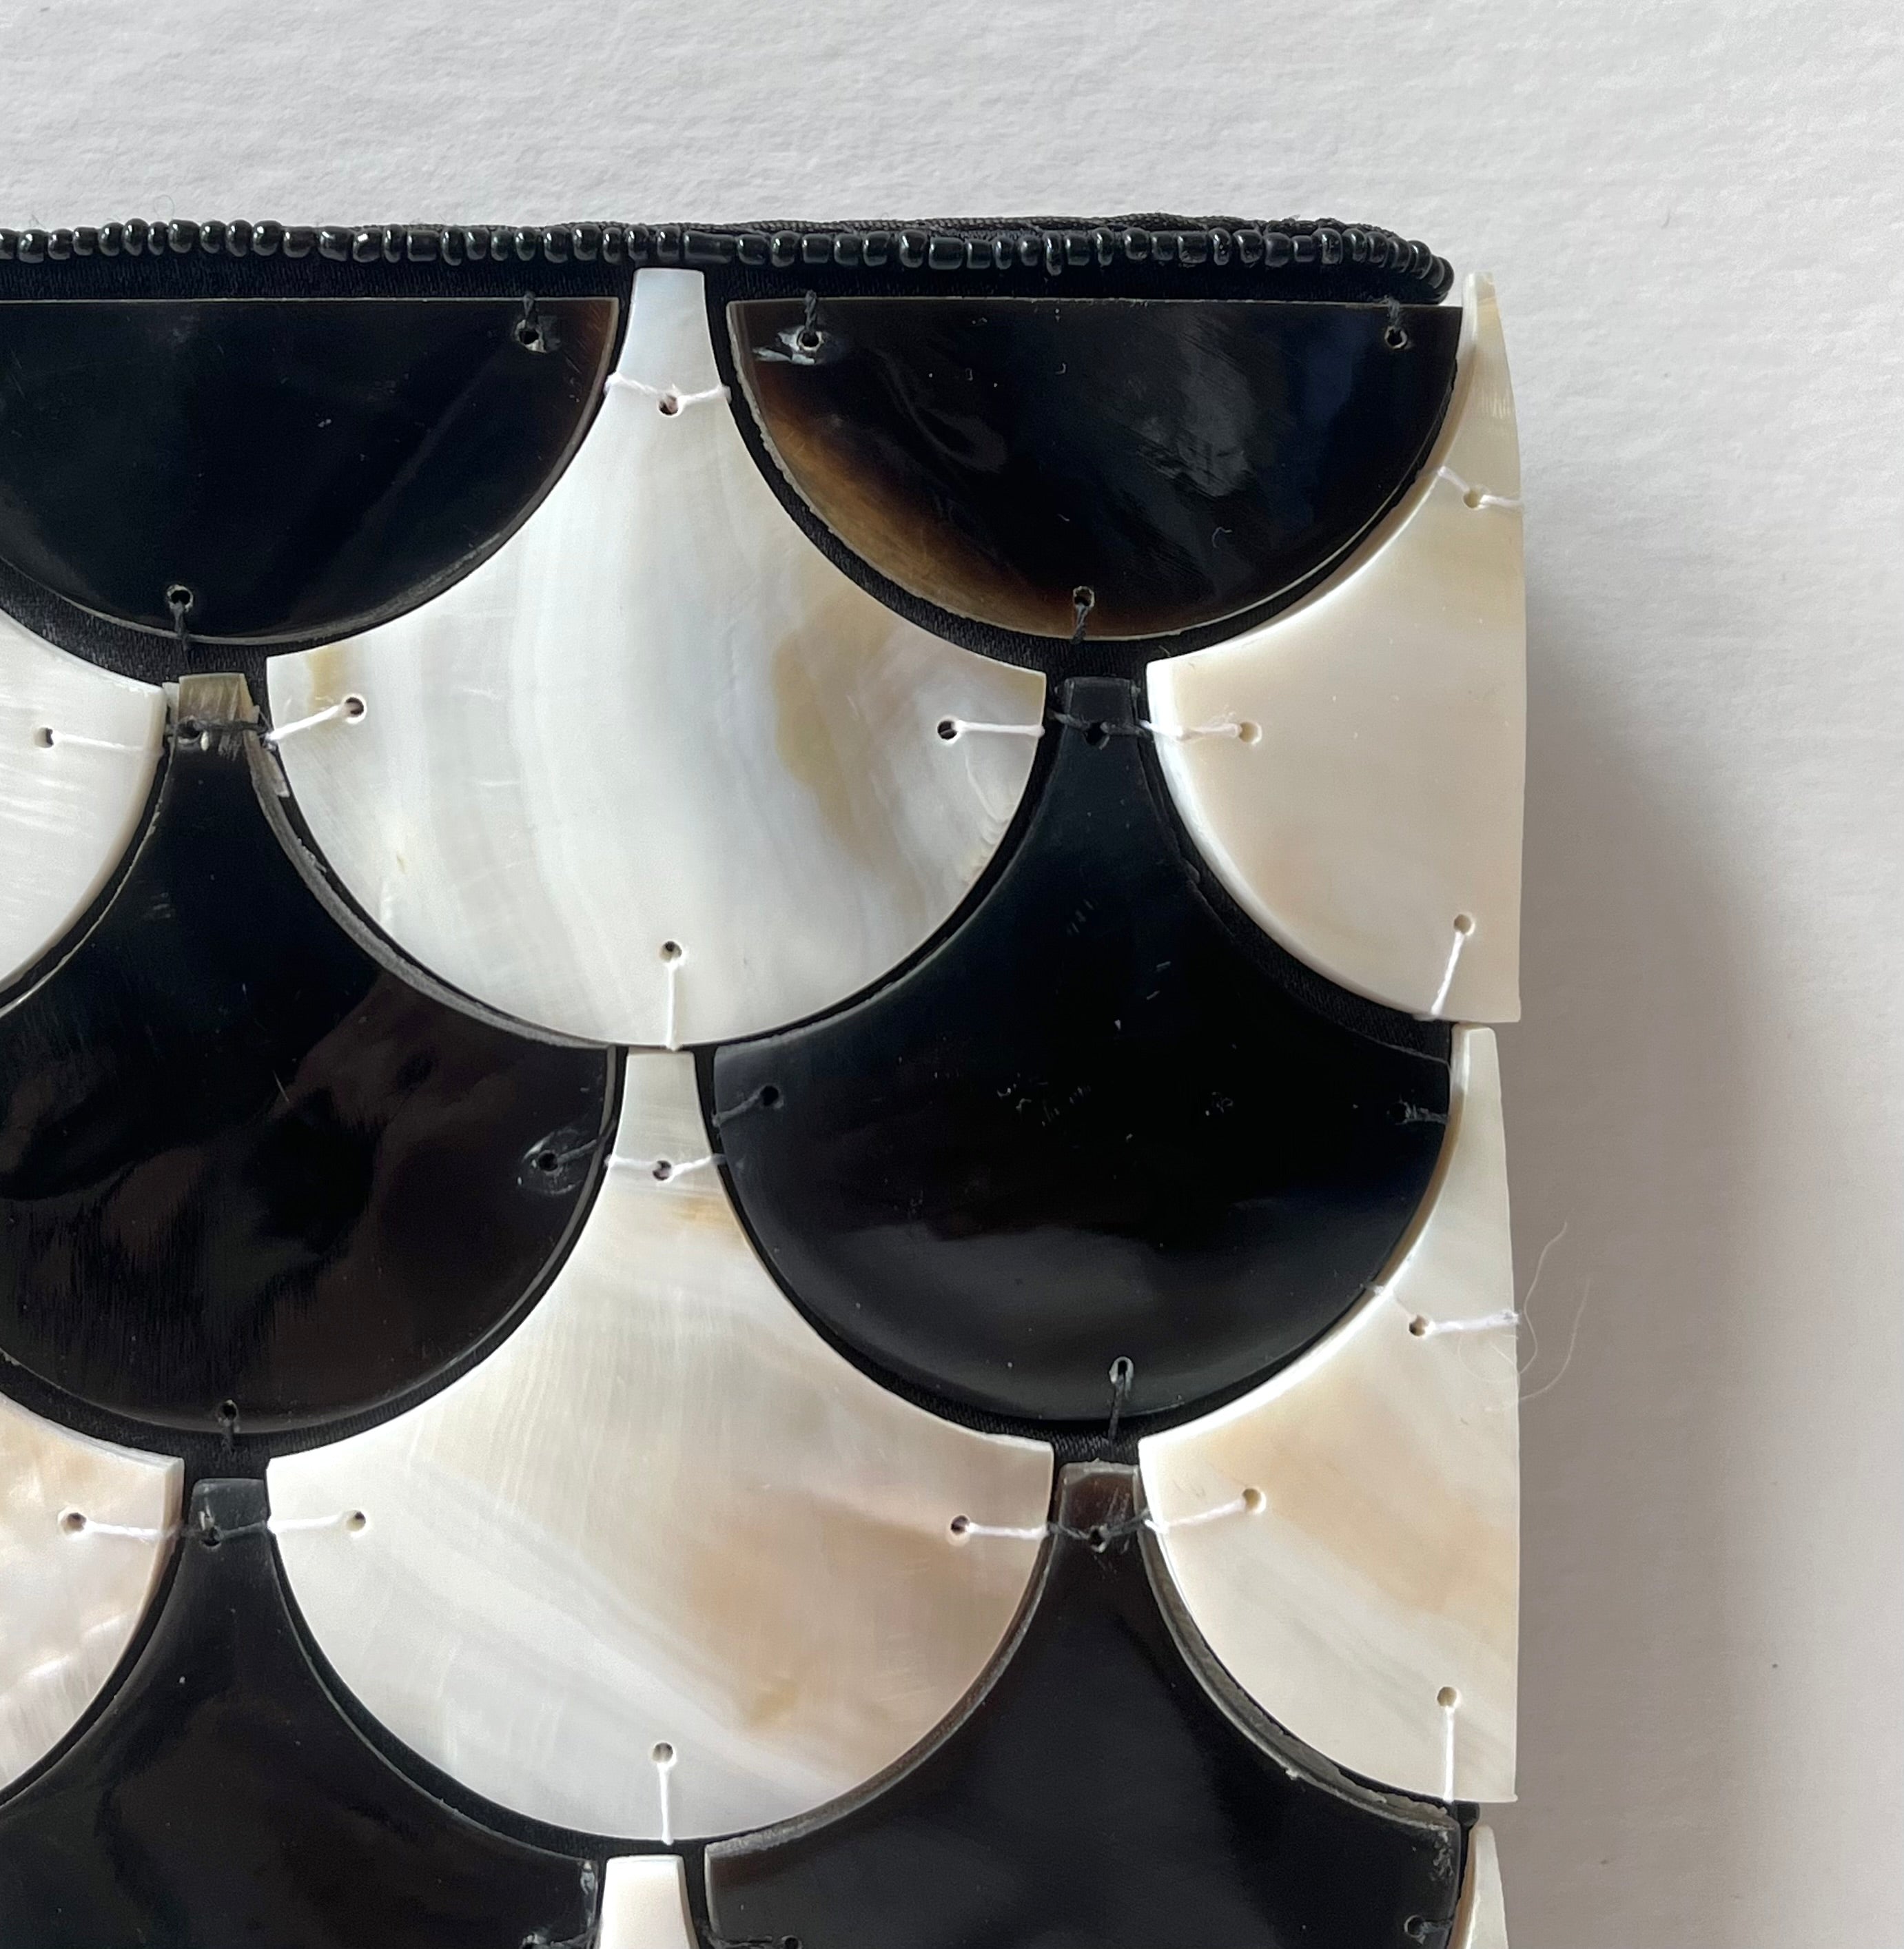 Vintage Sea Cove Beach to City Collection Black & White Mother of Pearl Tiled Clutch Handbag